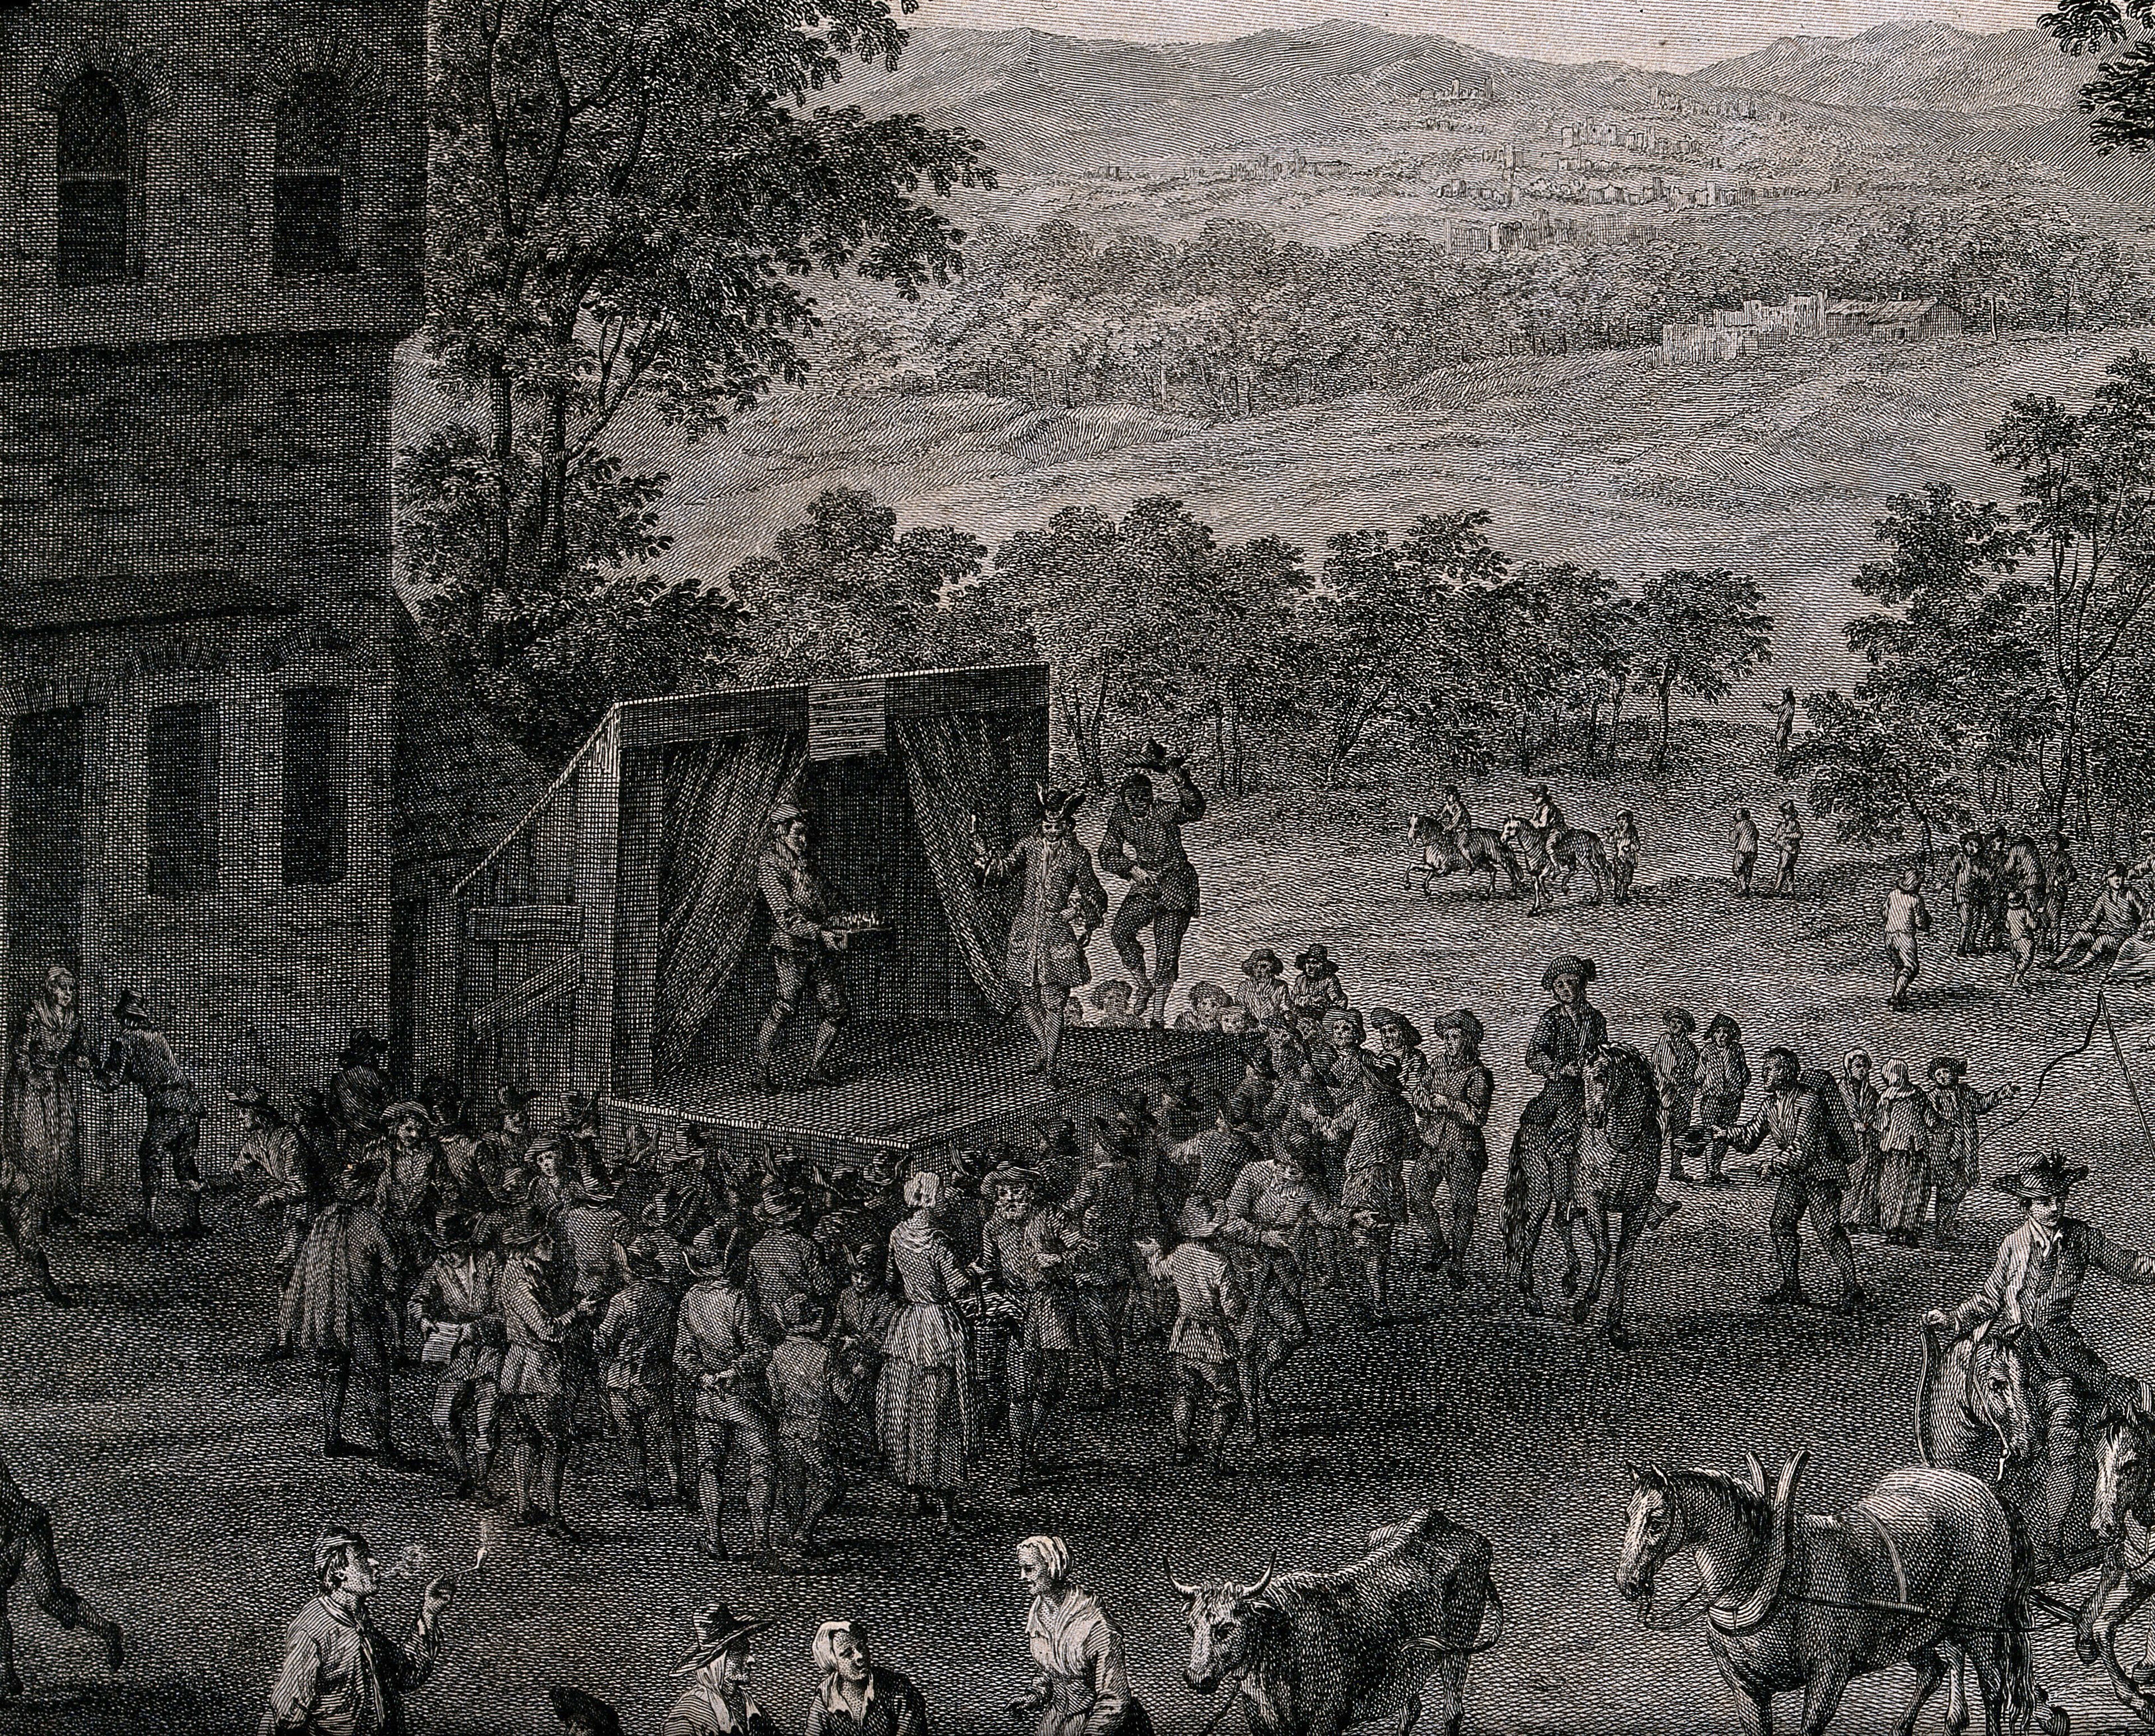 Crowds of people are gathered for a fete, a stage has been set up and actors are performing a play. Engraving by F. Dequevauviller, 1777, after M. Schoevaerdts.